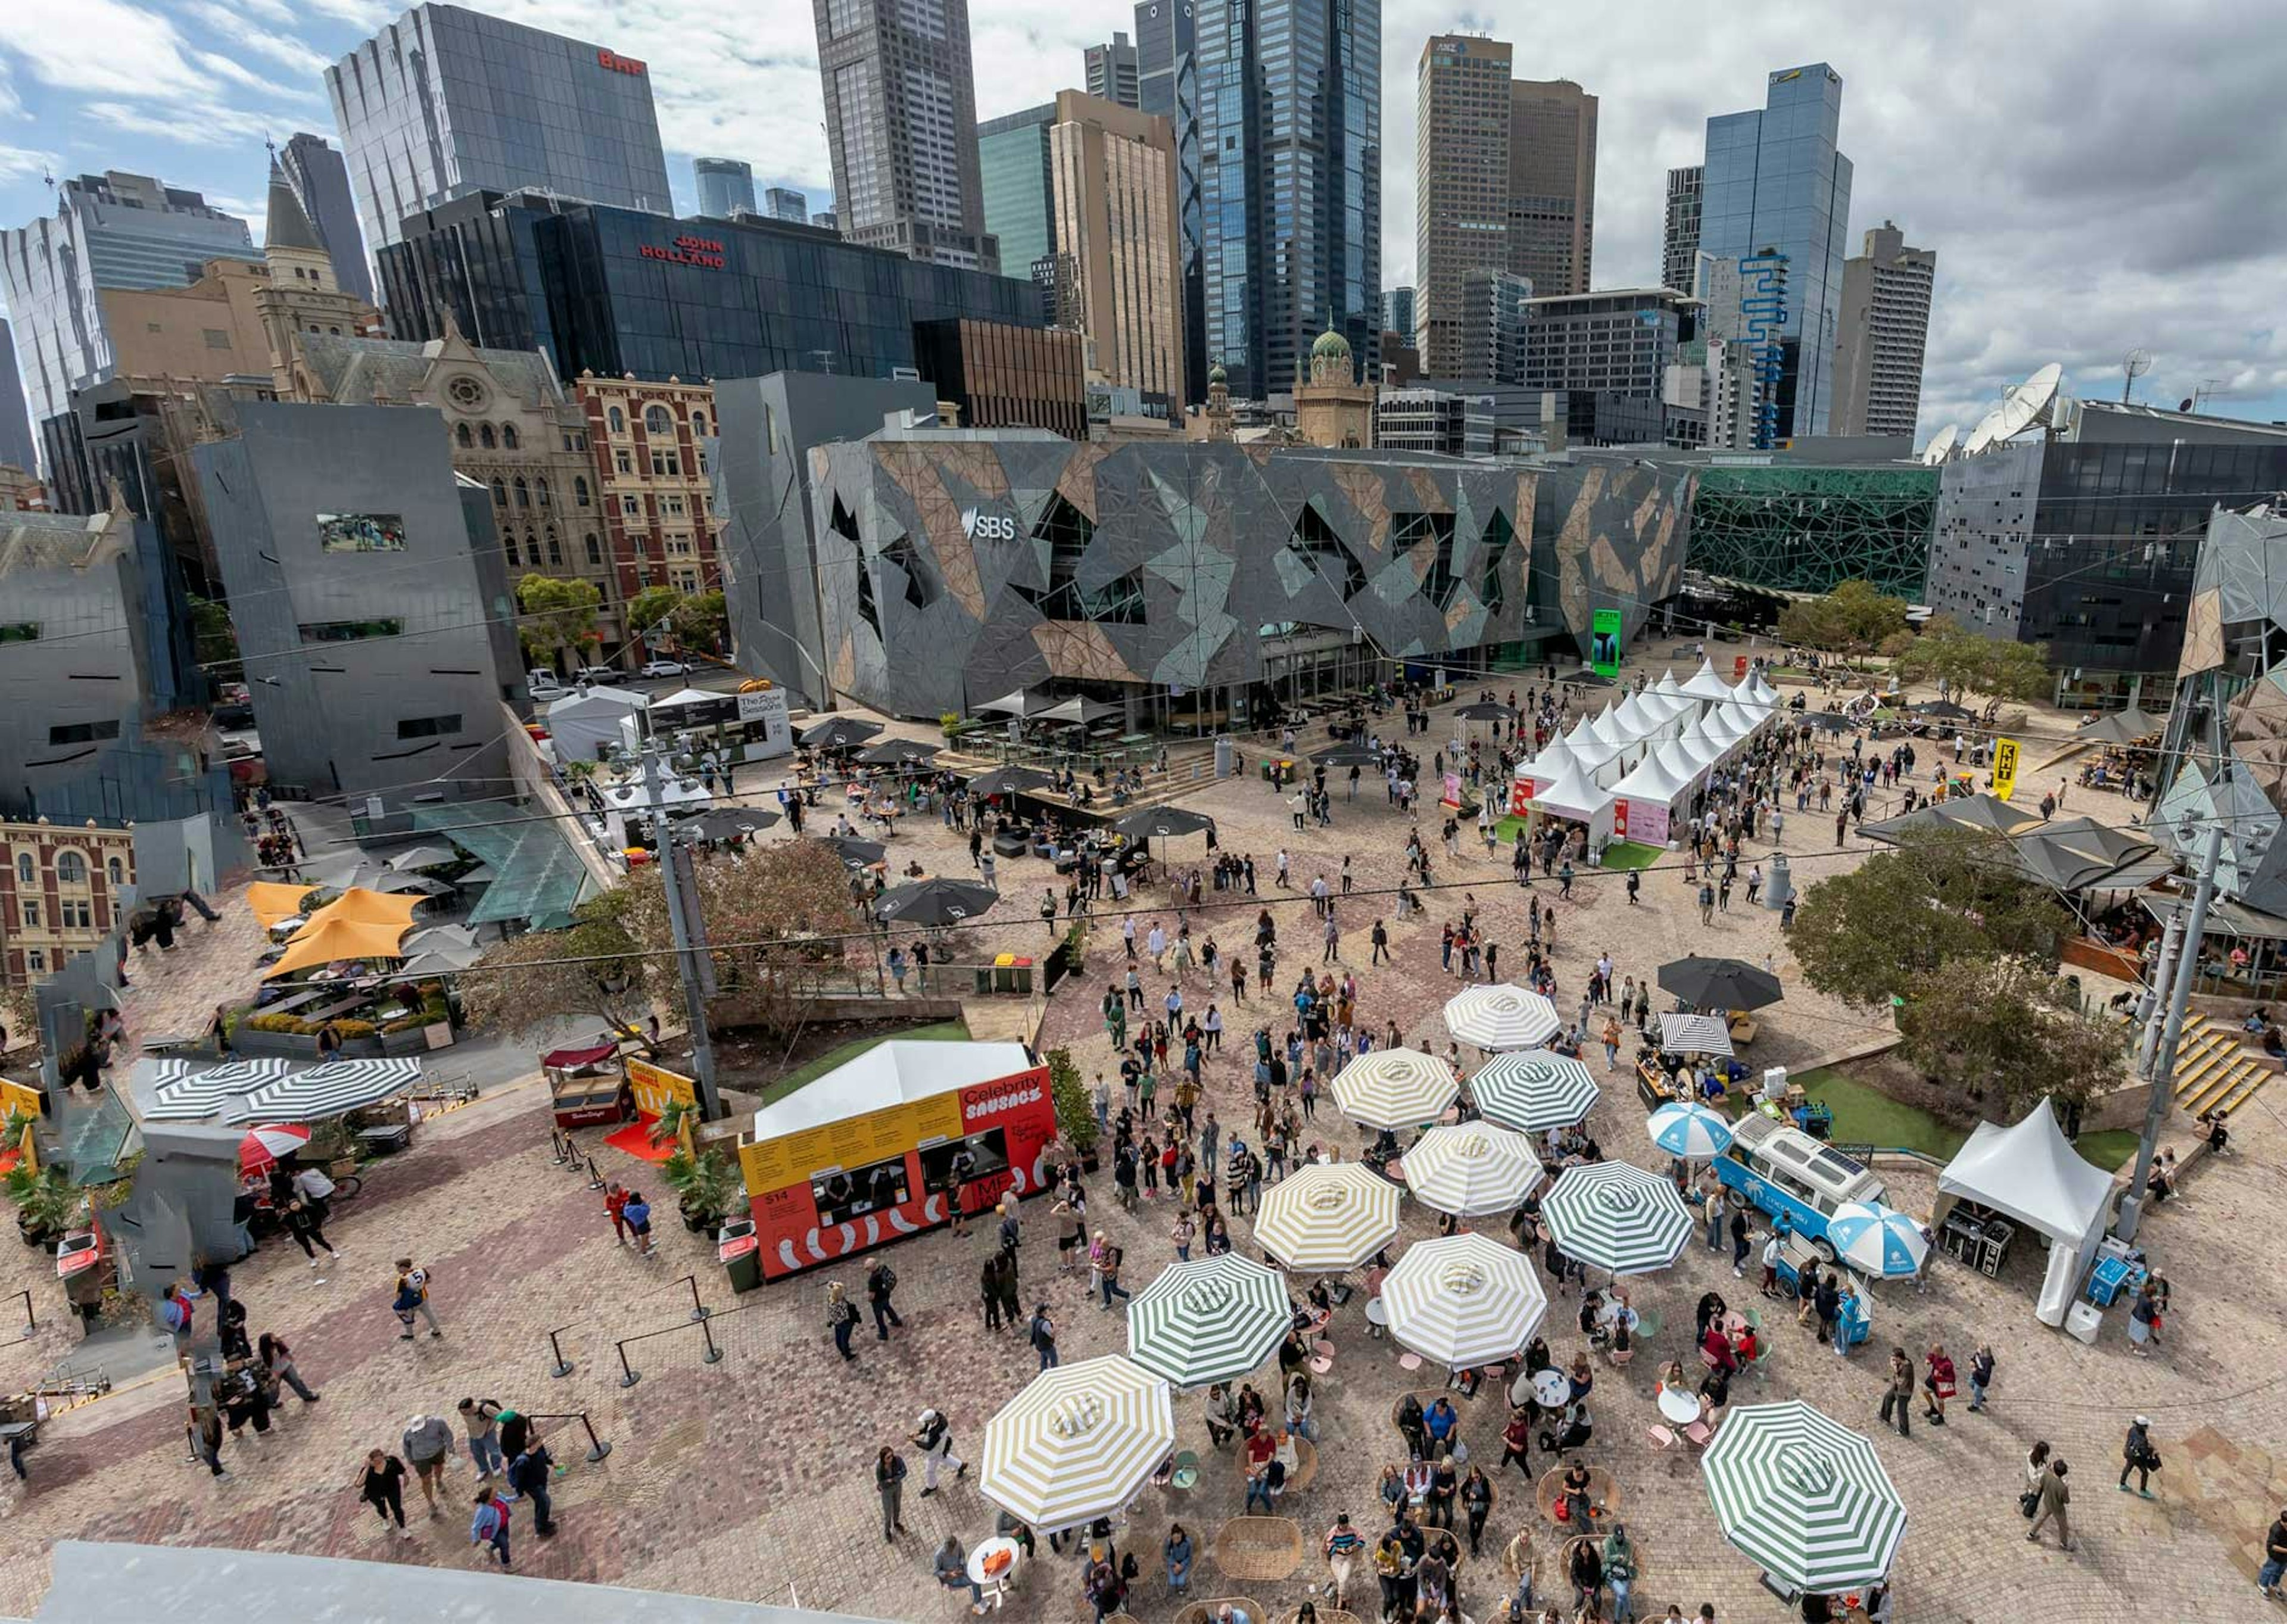 A photo from the rooftop of Transport Hotel in Fed Square, looking into the main square there is a big food festival setup with lots of umbrellas, a bar and marques with a couple of hundred people walking around